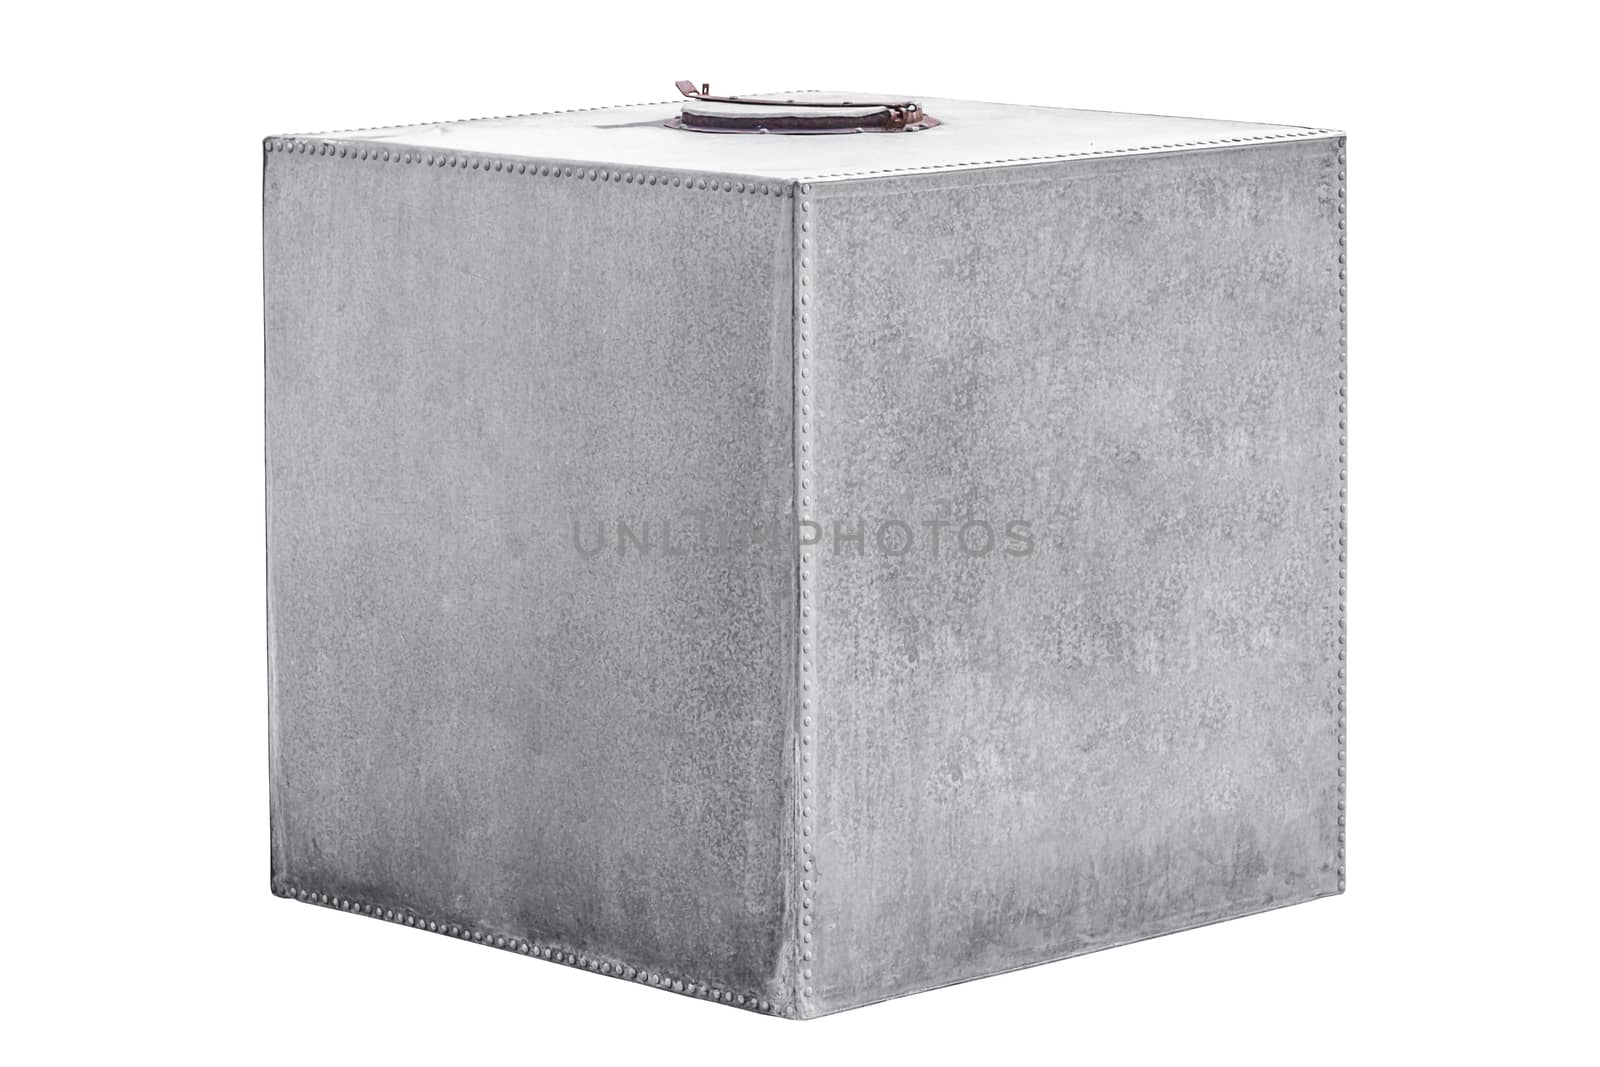 Old steel water tank isolated on white with clipping path